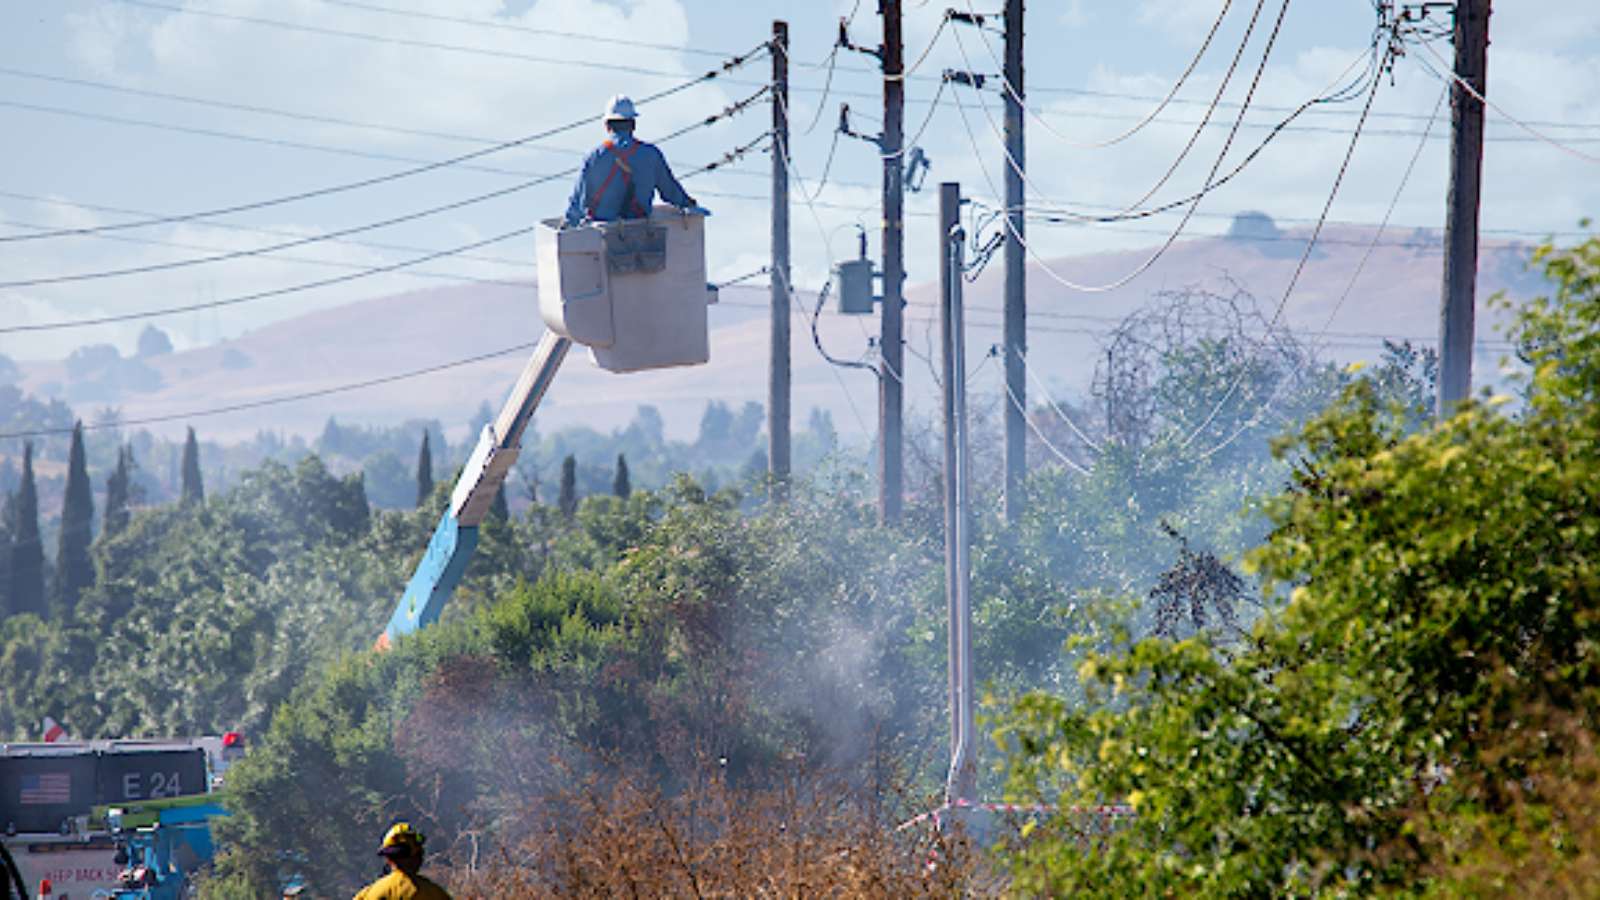 Electrical worker repairs power lines that caused a fire. (Adobe Stock)